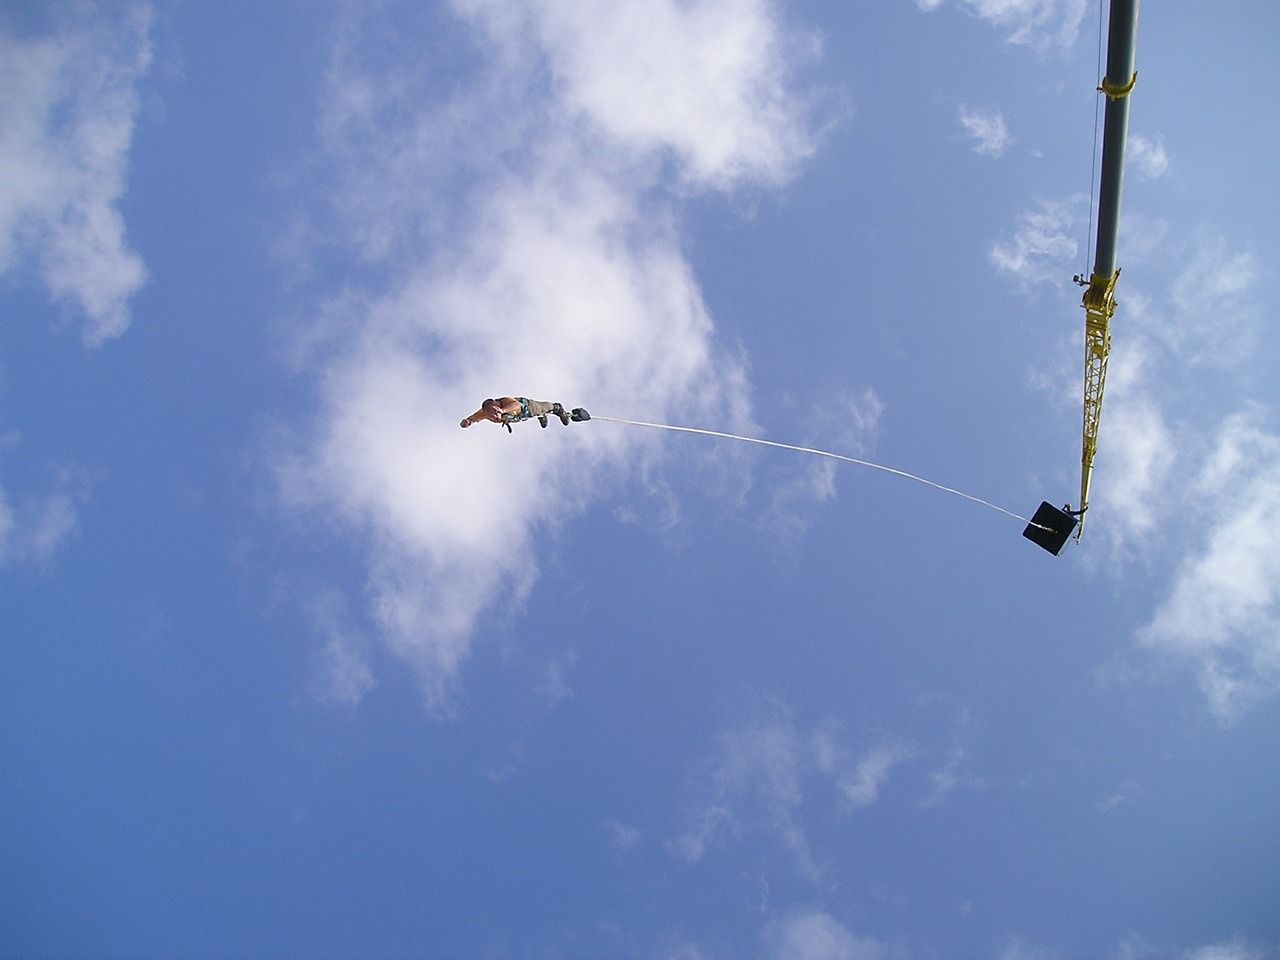 Bungee Jumping in Finland